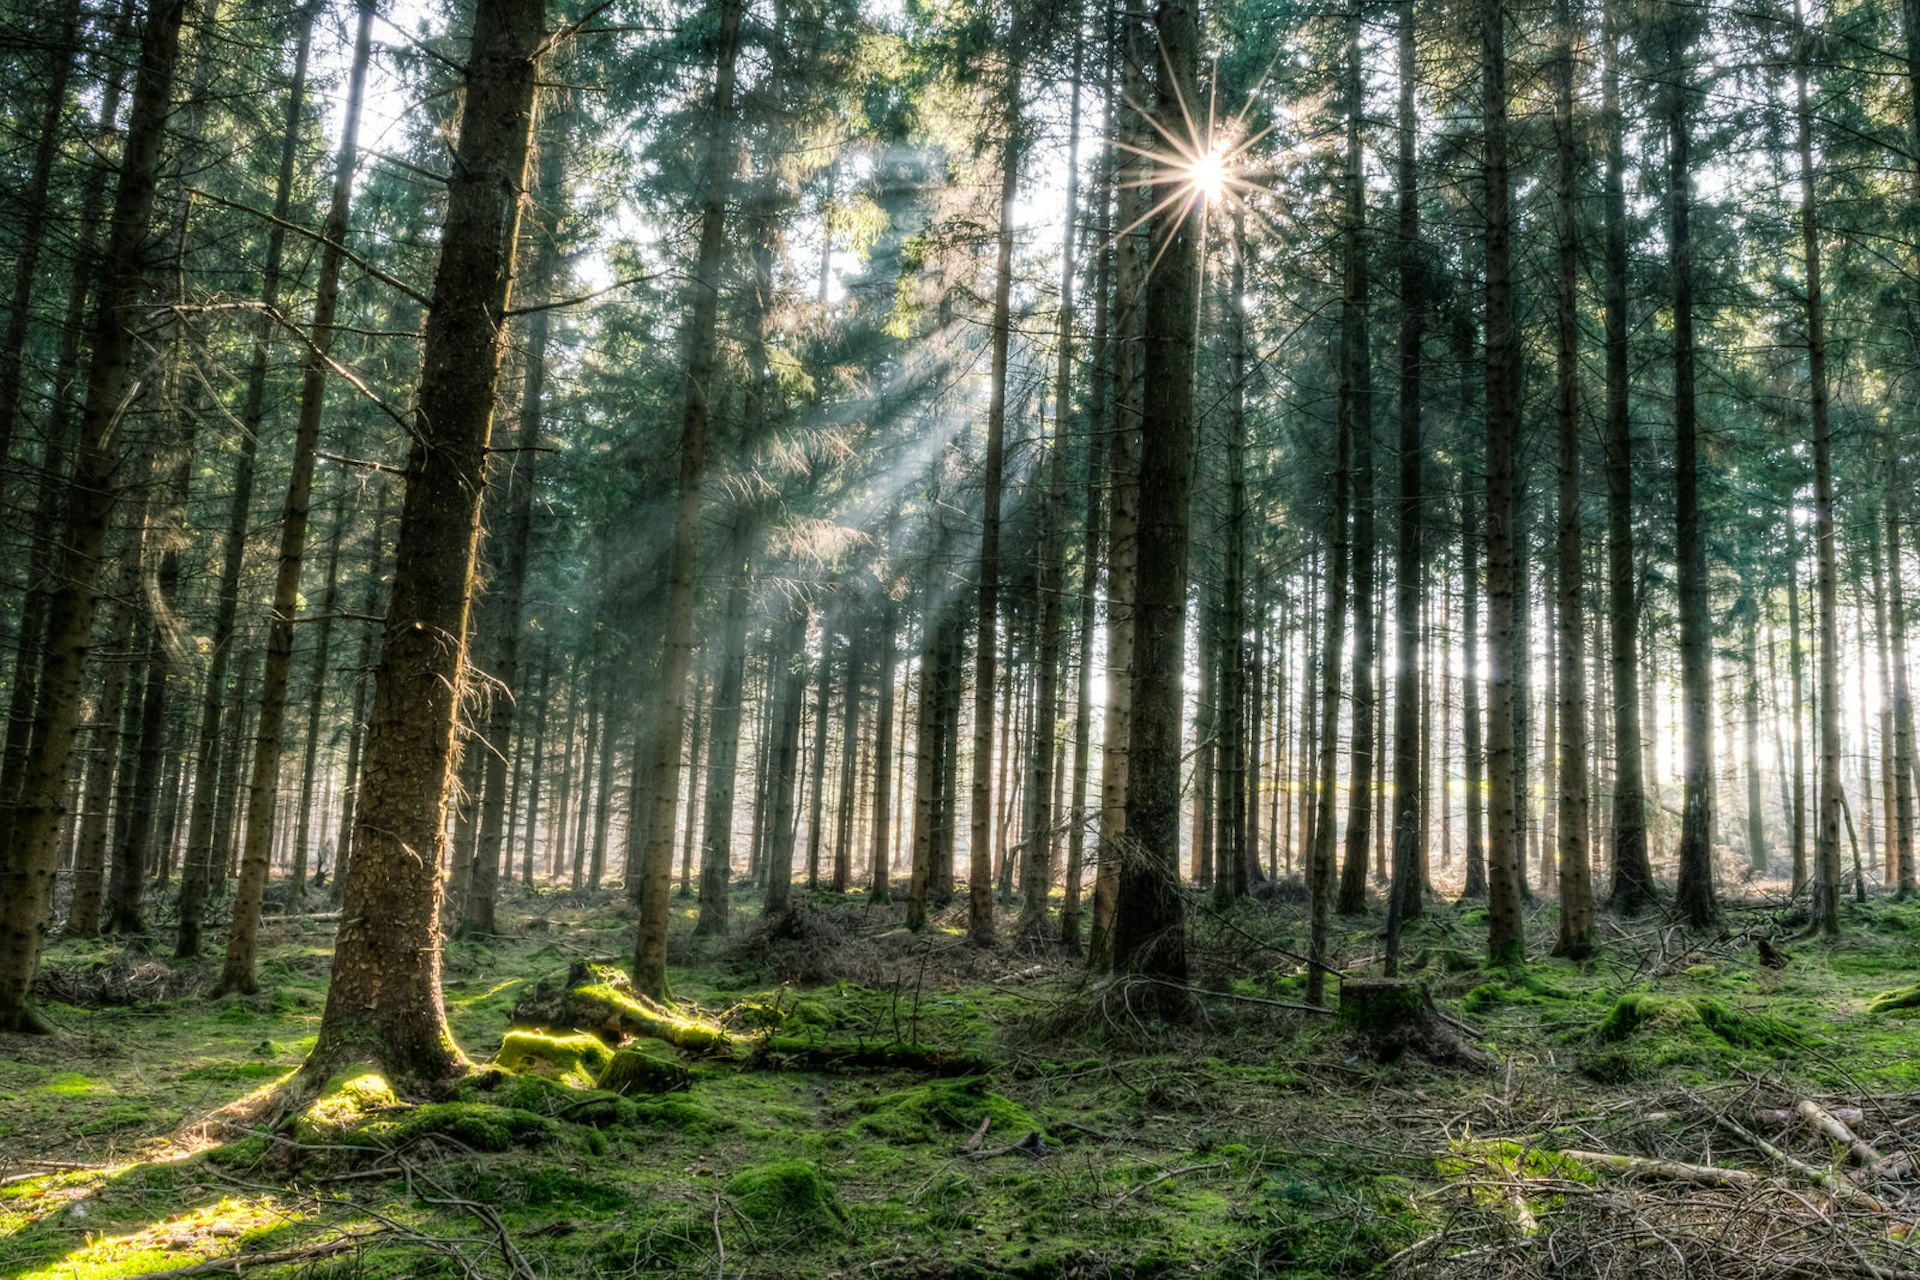 The sun shines through tall trees onto a moss-covered woodland floor in the Forest of Dean, one of the UK locations used in Killing Eve season two